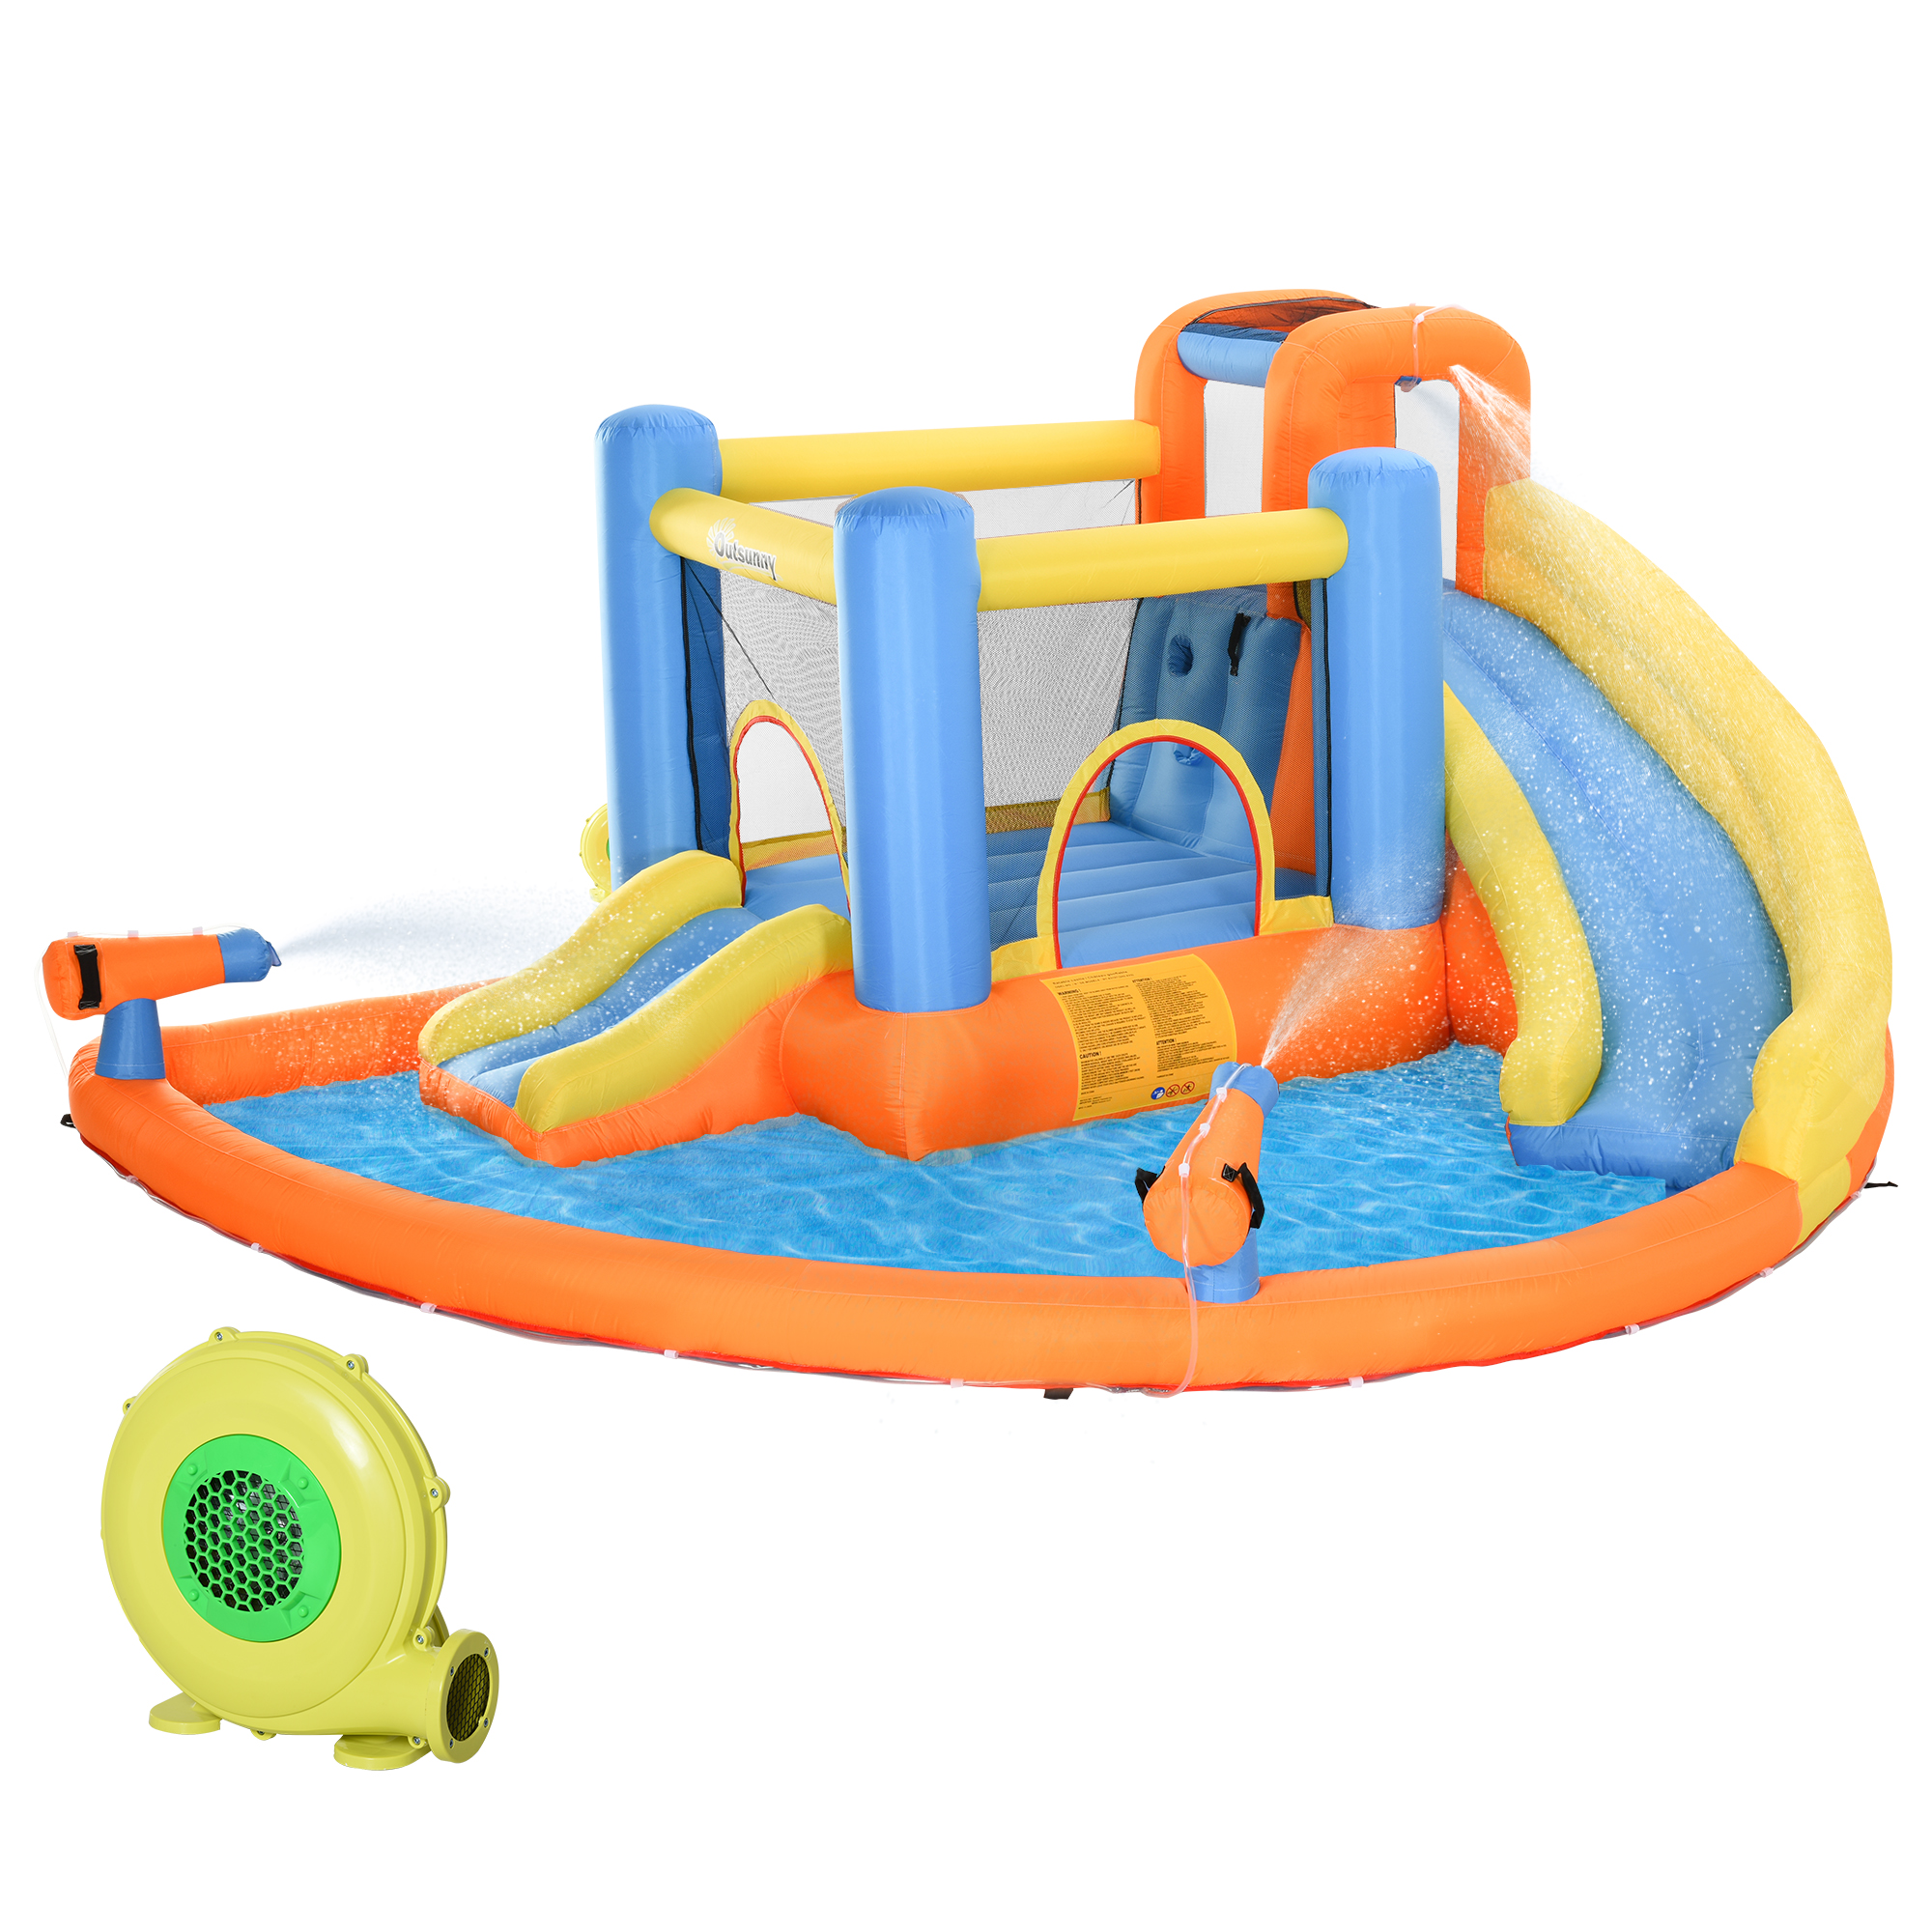 Outsunny Kids Inflatable Water Slide 5-in-1 Bounce House Water Park Jumping Castle with Water Pool, Slide, Climbing Walls, & 2 Water Cannons, 450W Air Blower - image 1 of 9